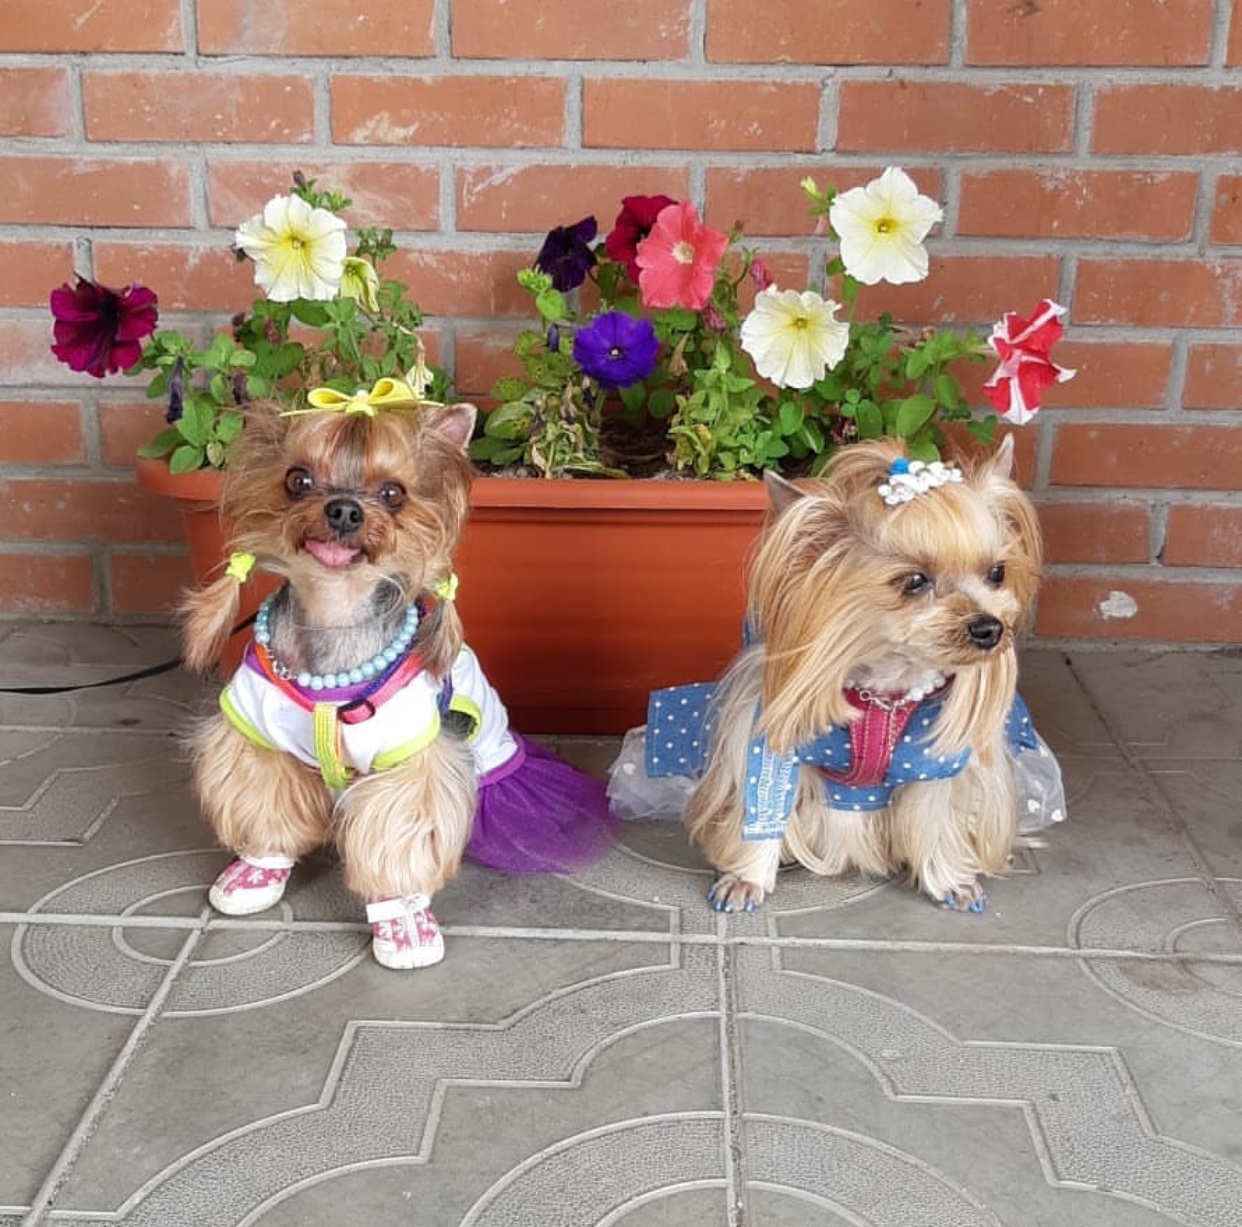 two Yorkshire Terrier in their cute dresses while sitting on the floor